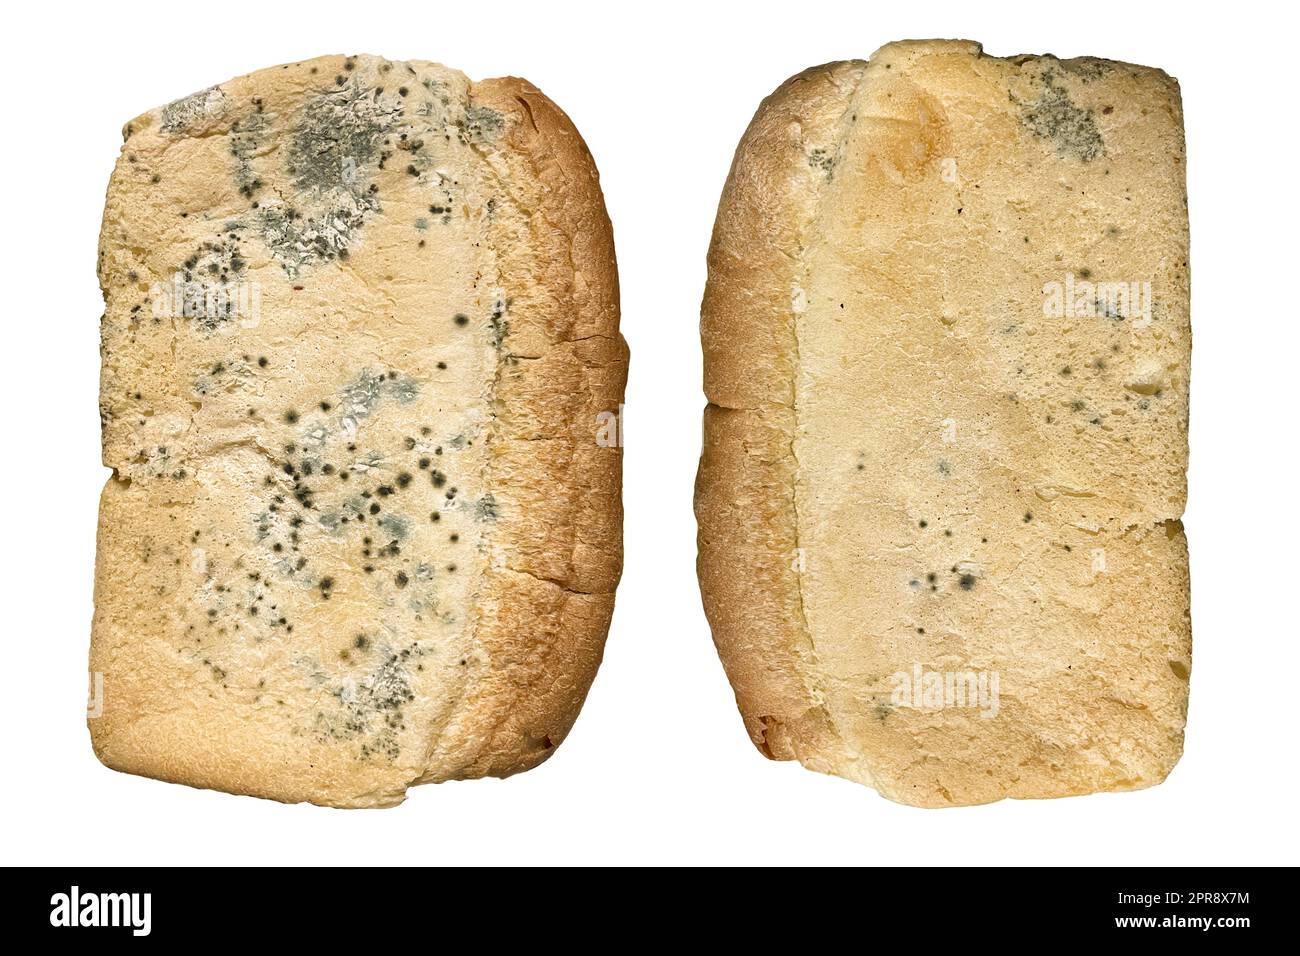 Bread with mould, composite image - Stock Image - F025/0148